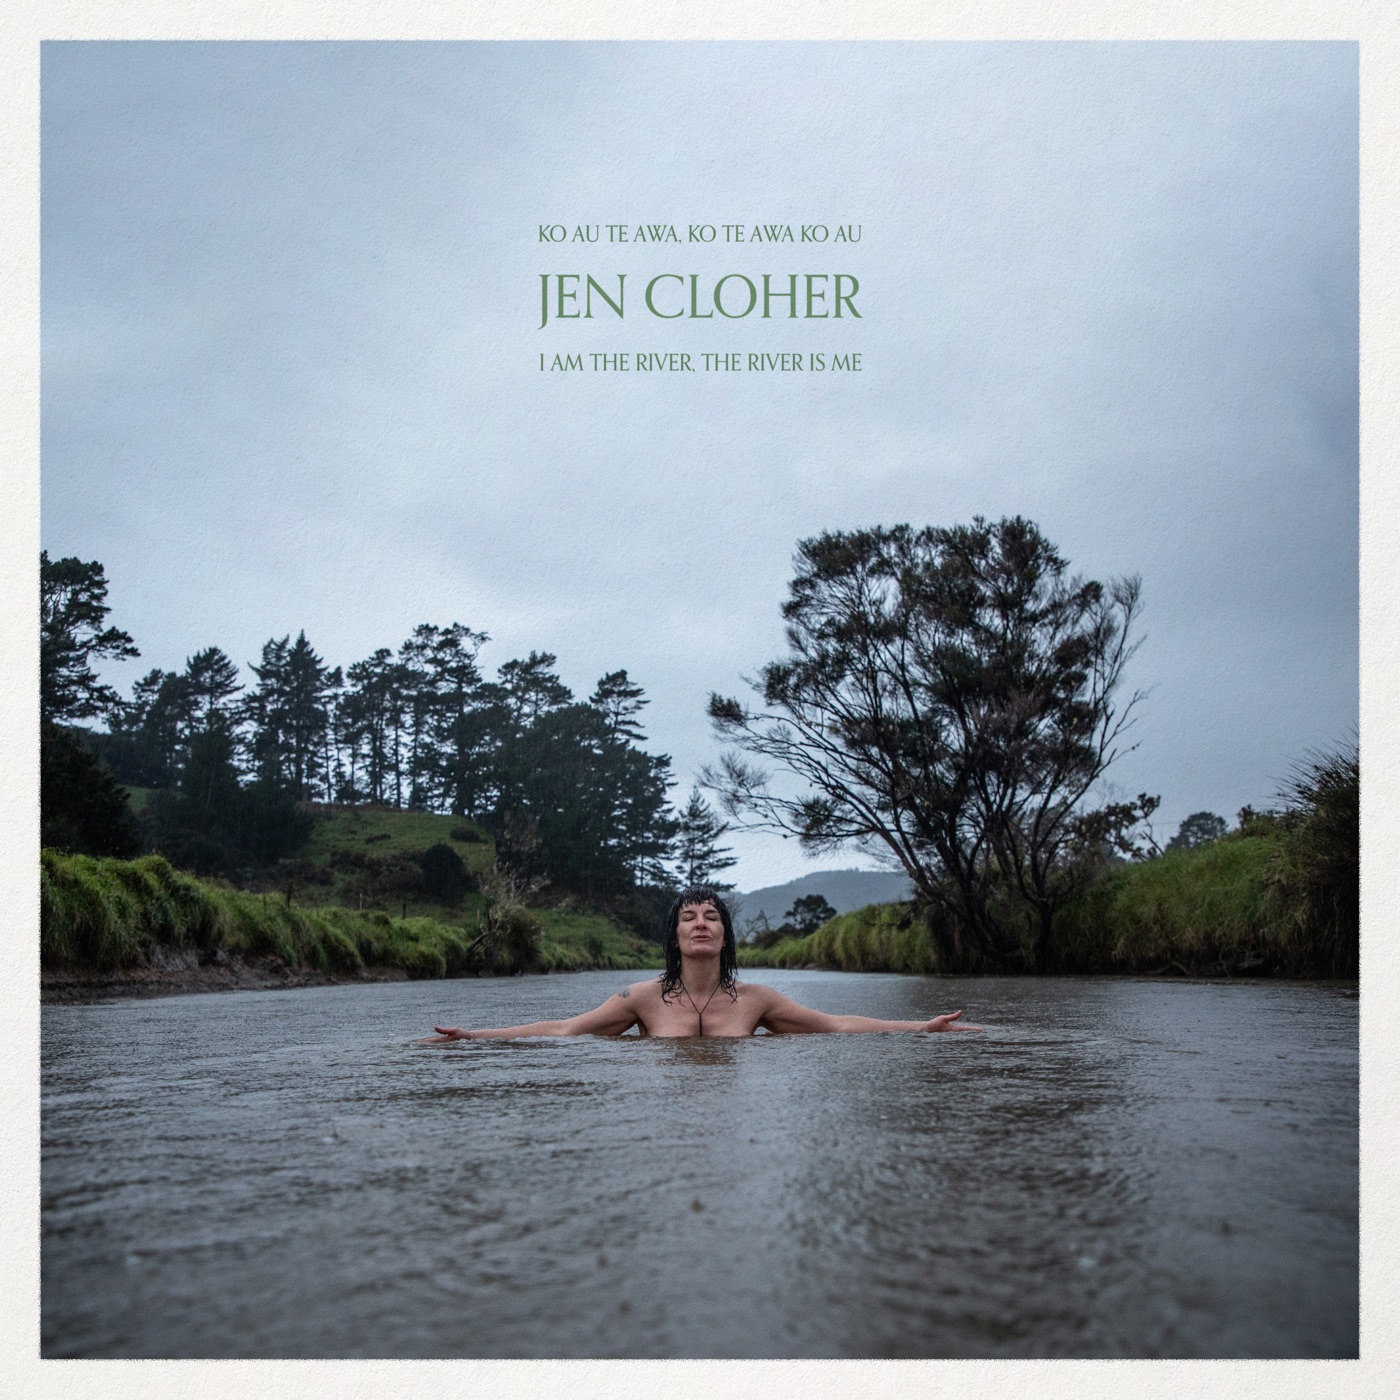 I Am the River, the River Is Me by Jen Cloher